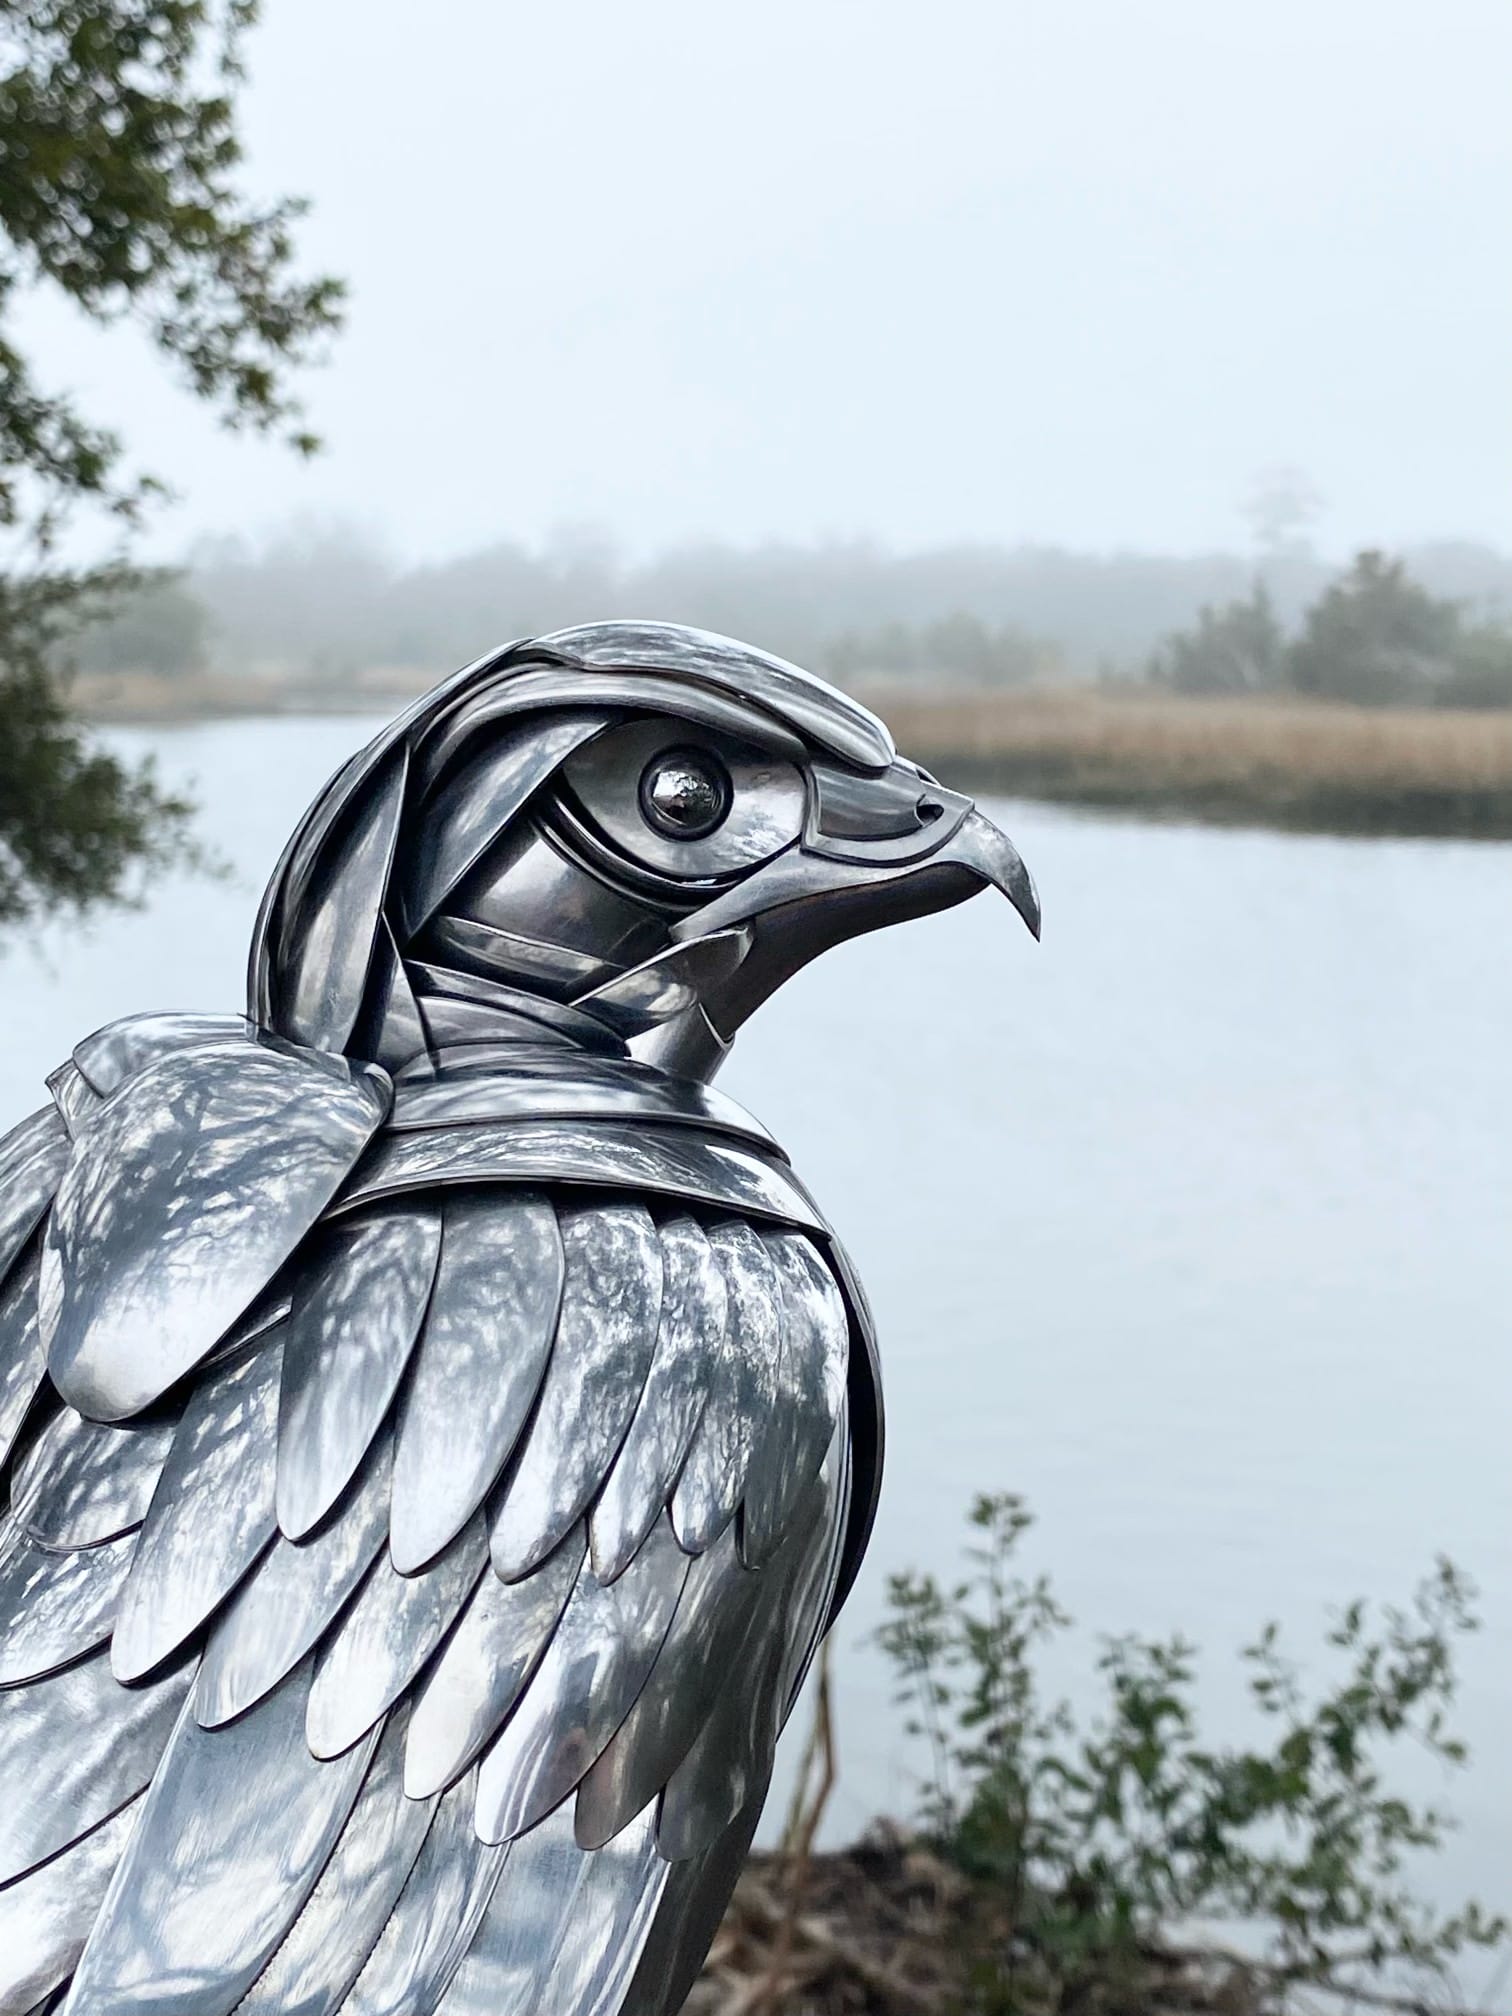 a metal bird made from repurposed silverware perches in the trees, a body of water rests in the background